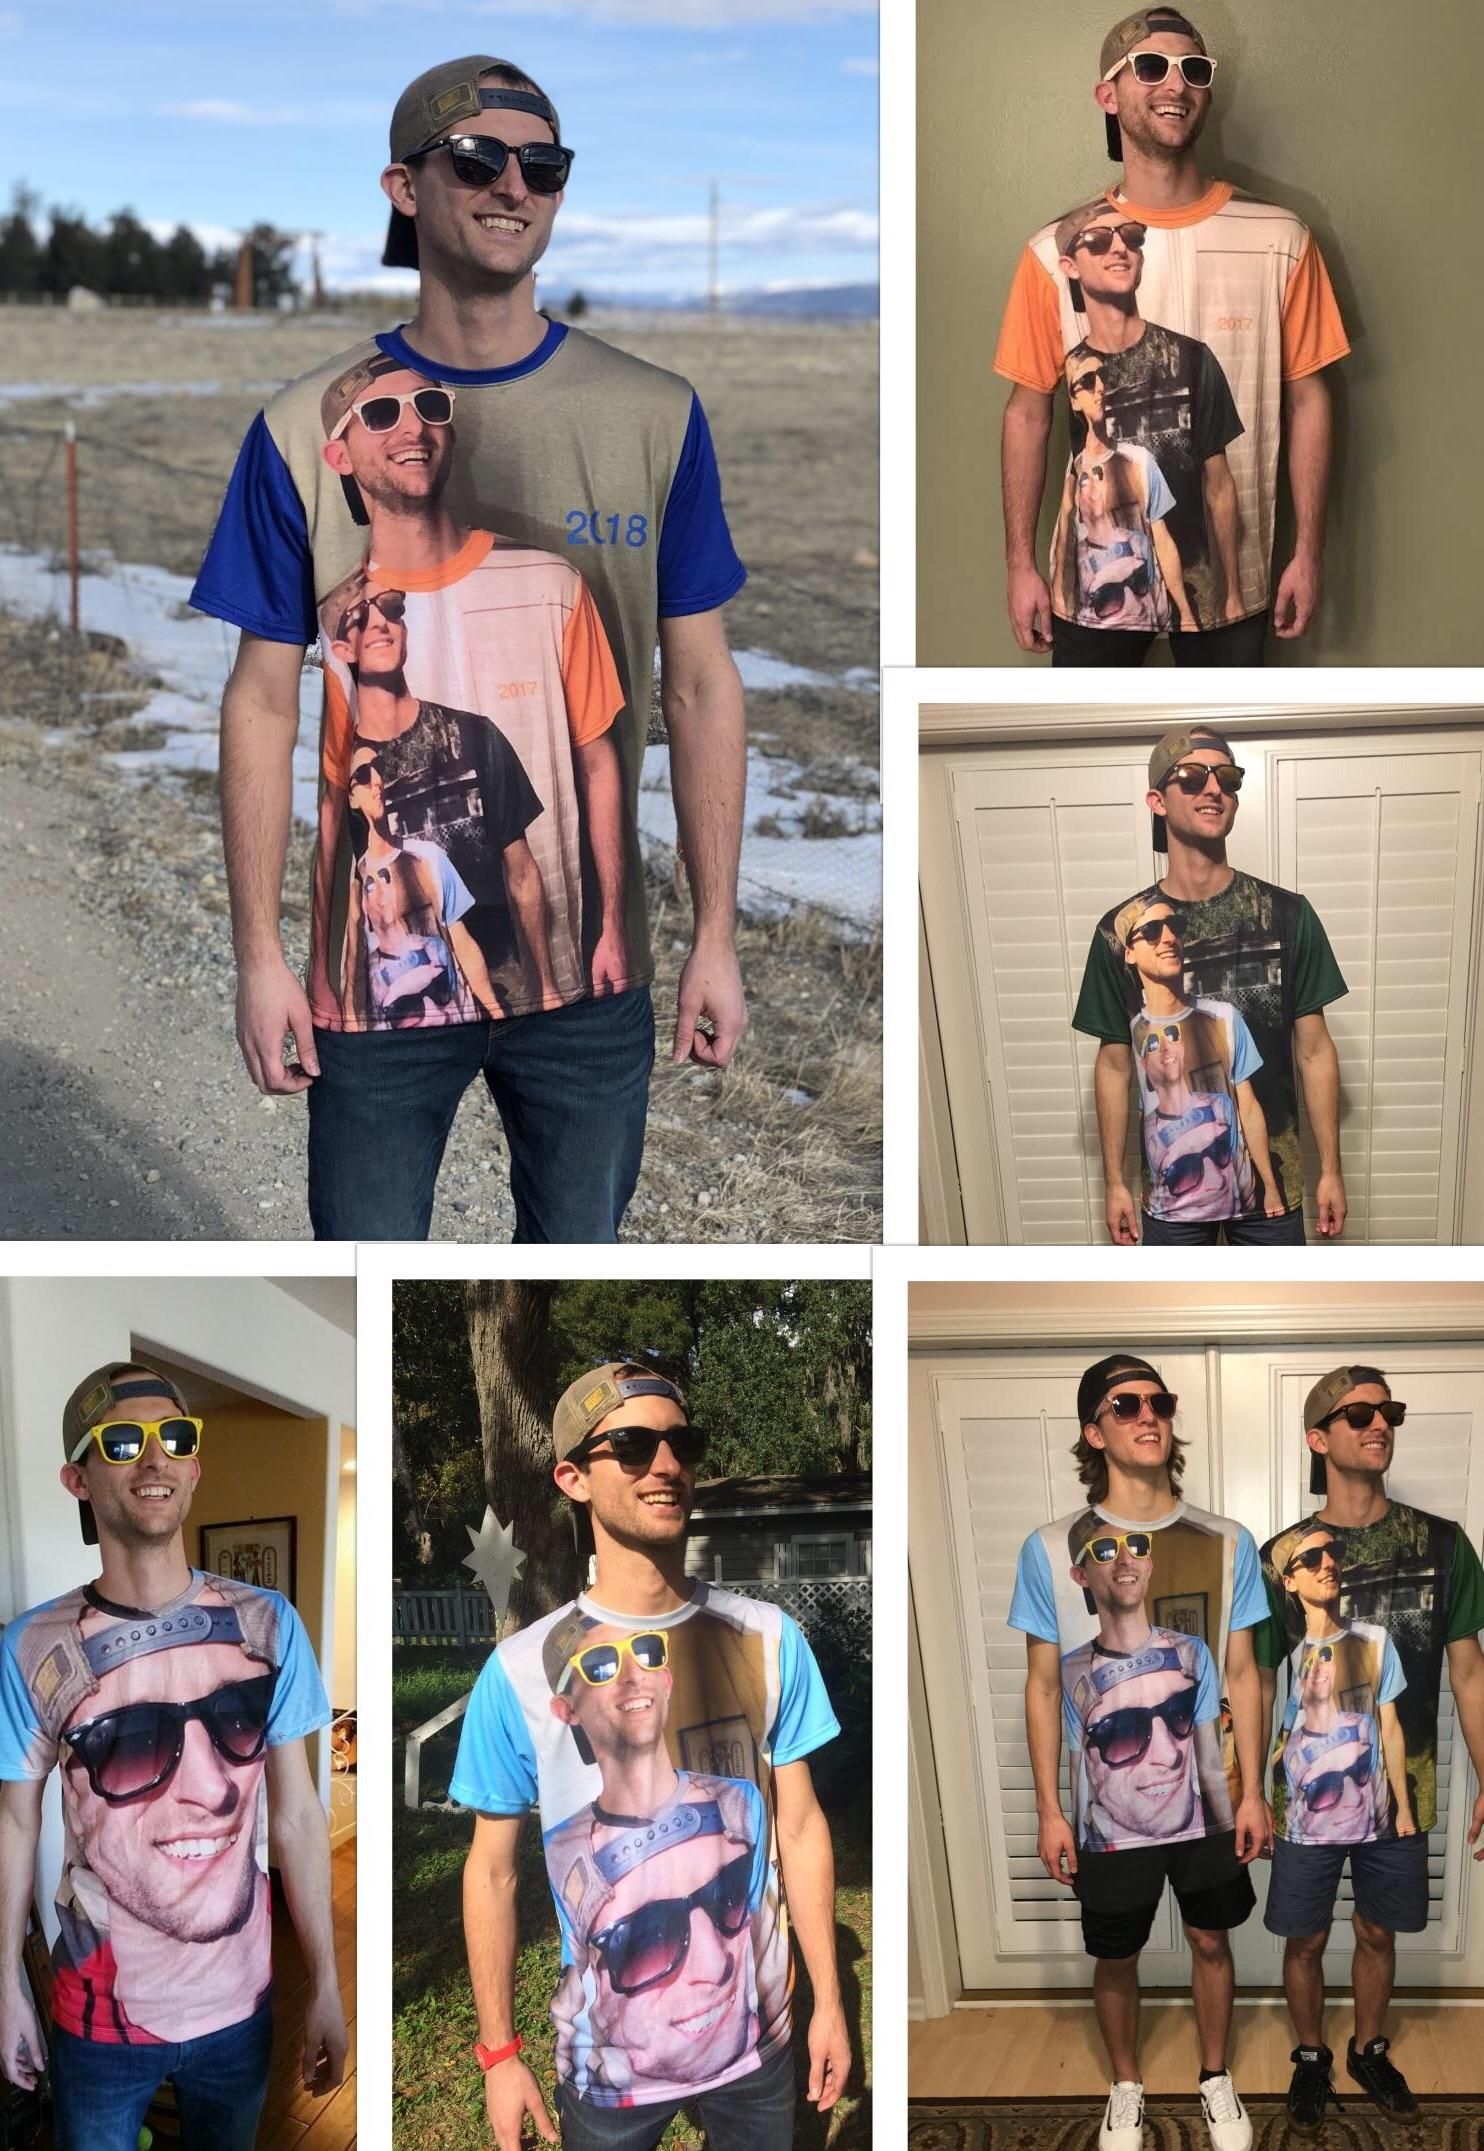 "Shirtception" - my favorite gift every year from my brother. We're now at level 5.